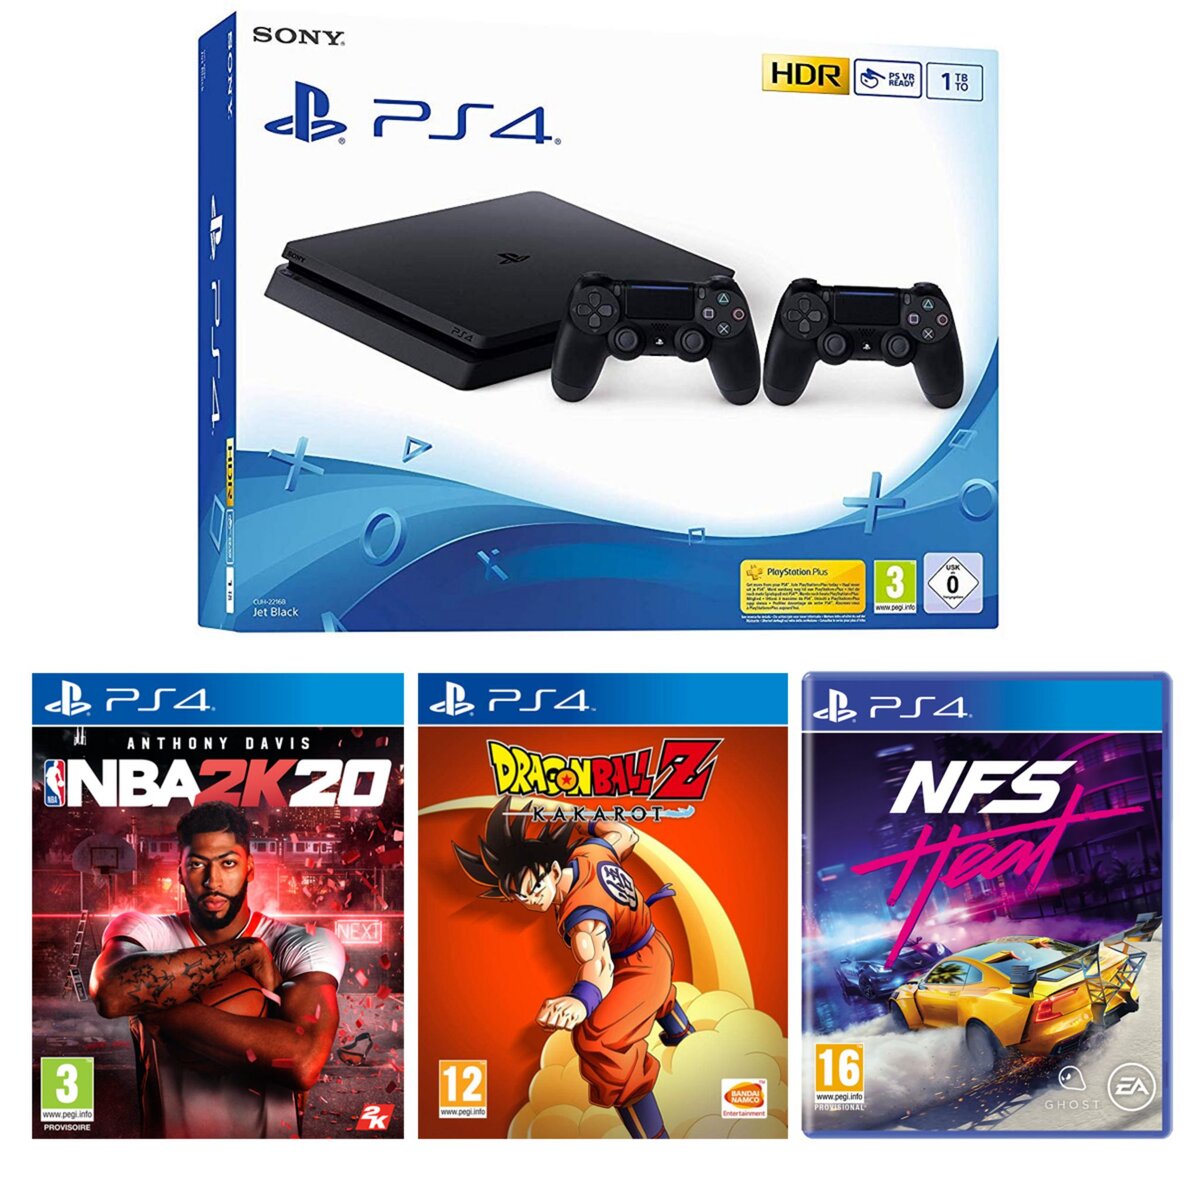 Console PS4 Slim Noire 1To 2 manettes + NBA 2K20 + Need For Speed Heat + Dragon Ball Z: Kakarot